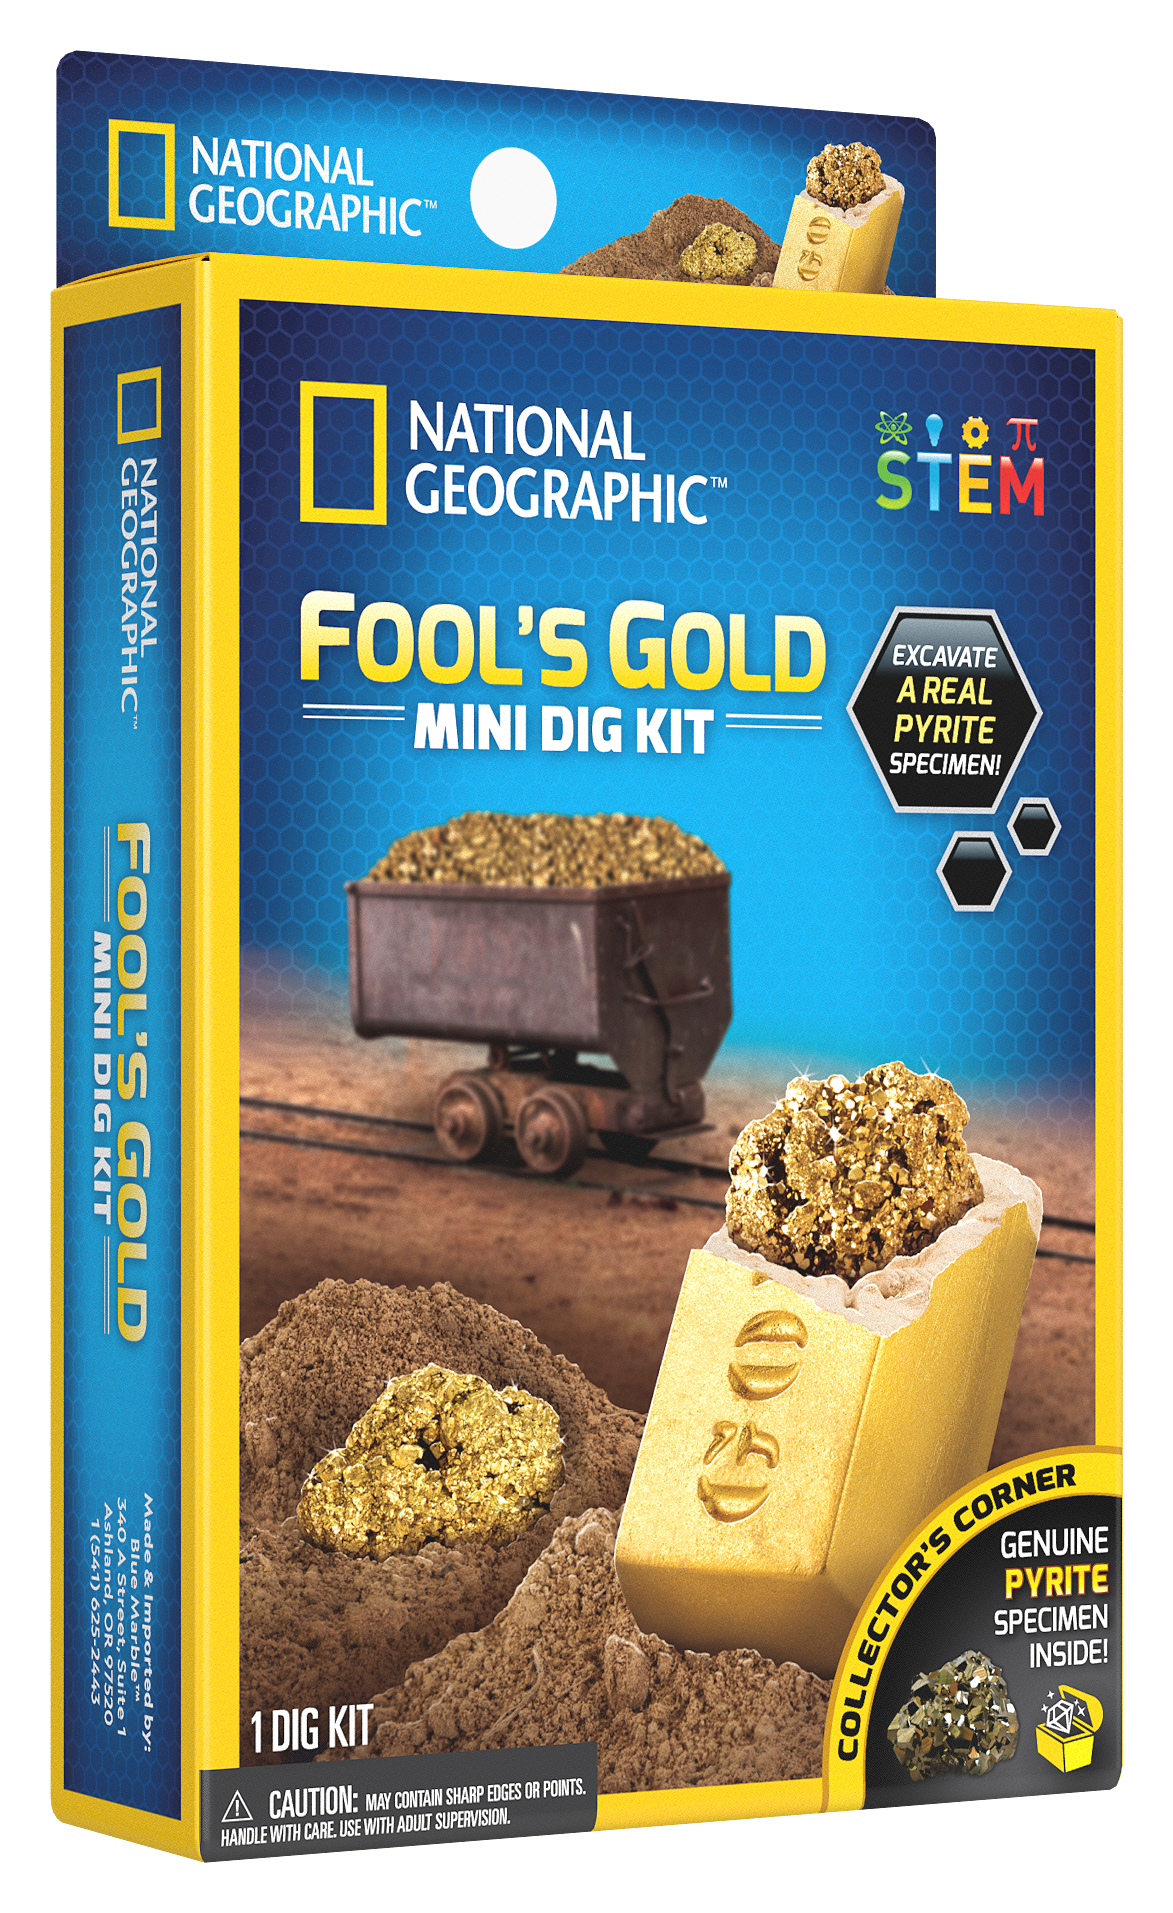 National Geographic Fool's Gold Dig Kits